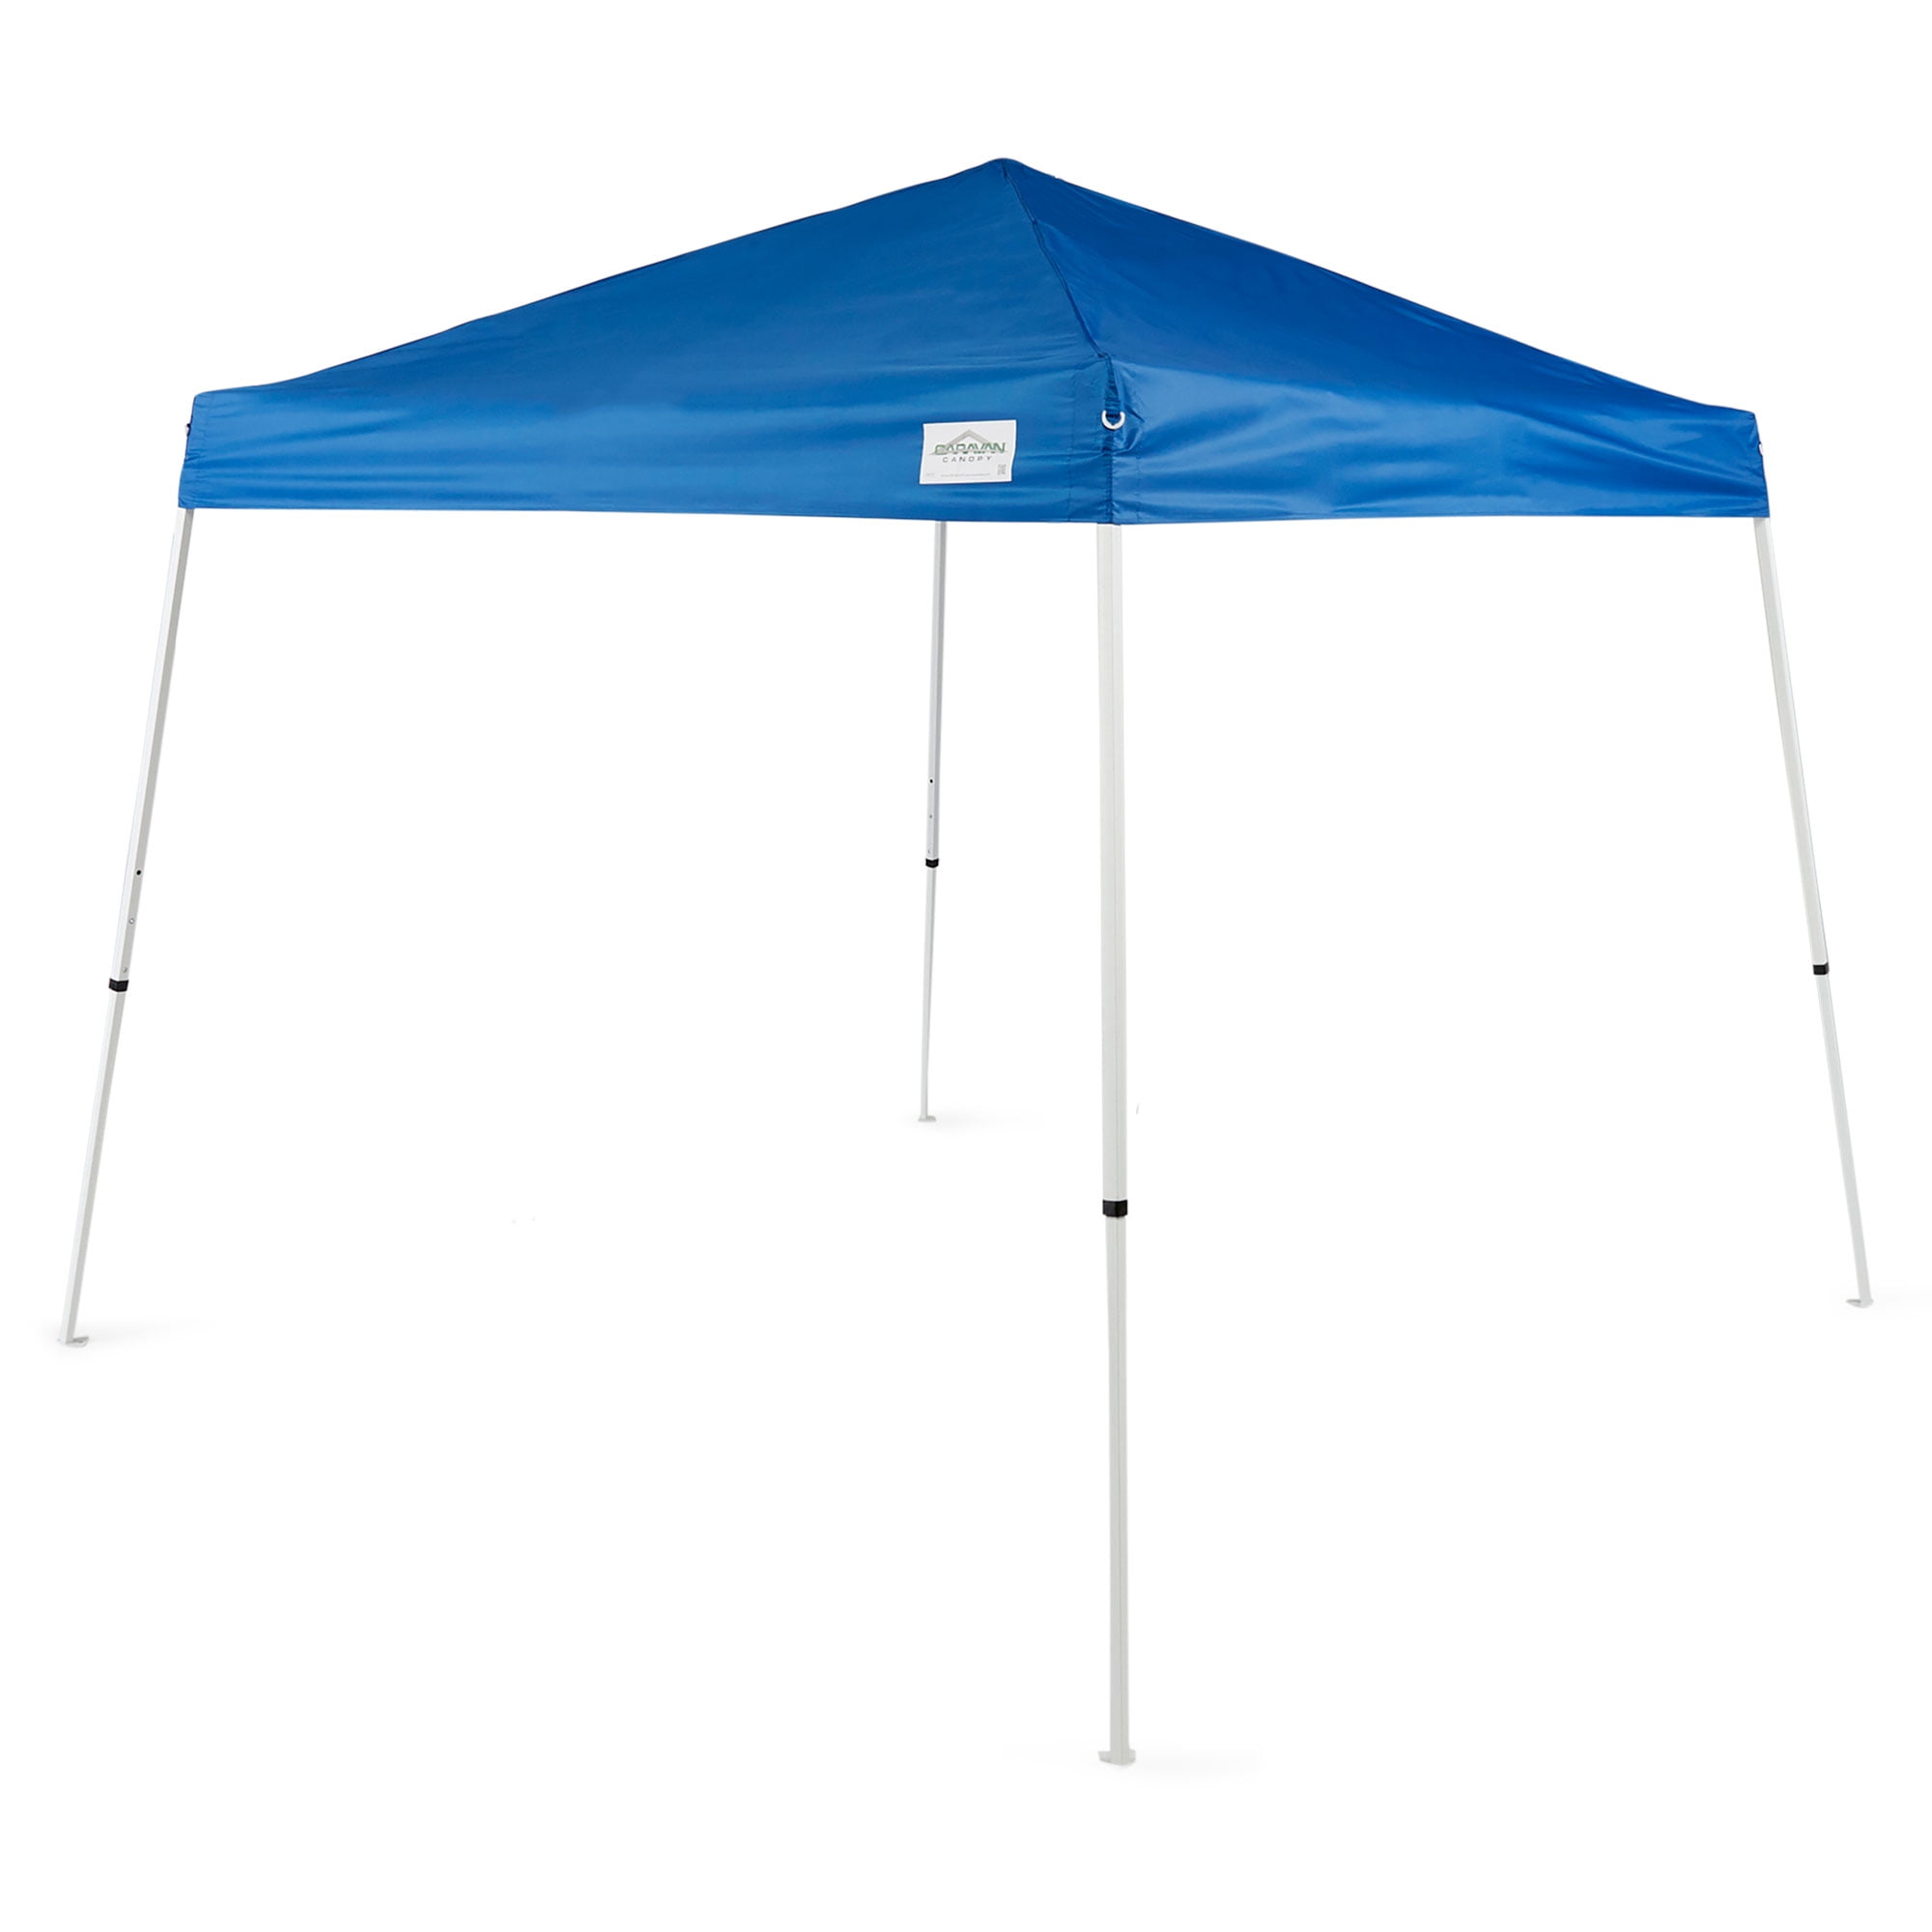 2 Pack Caravan Canopy V Series 2 10'x10' Entry Level Angled Leg Instant Canopy 